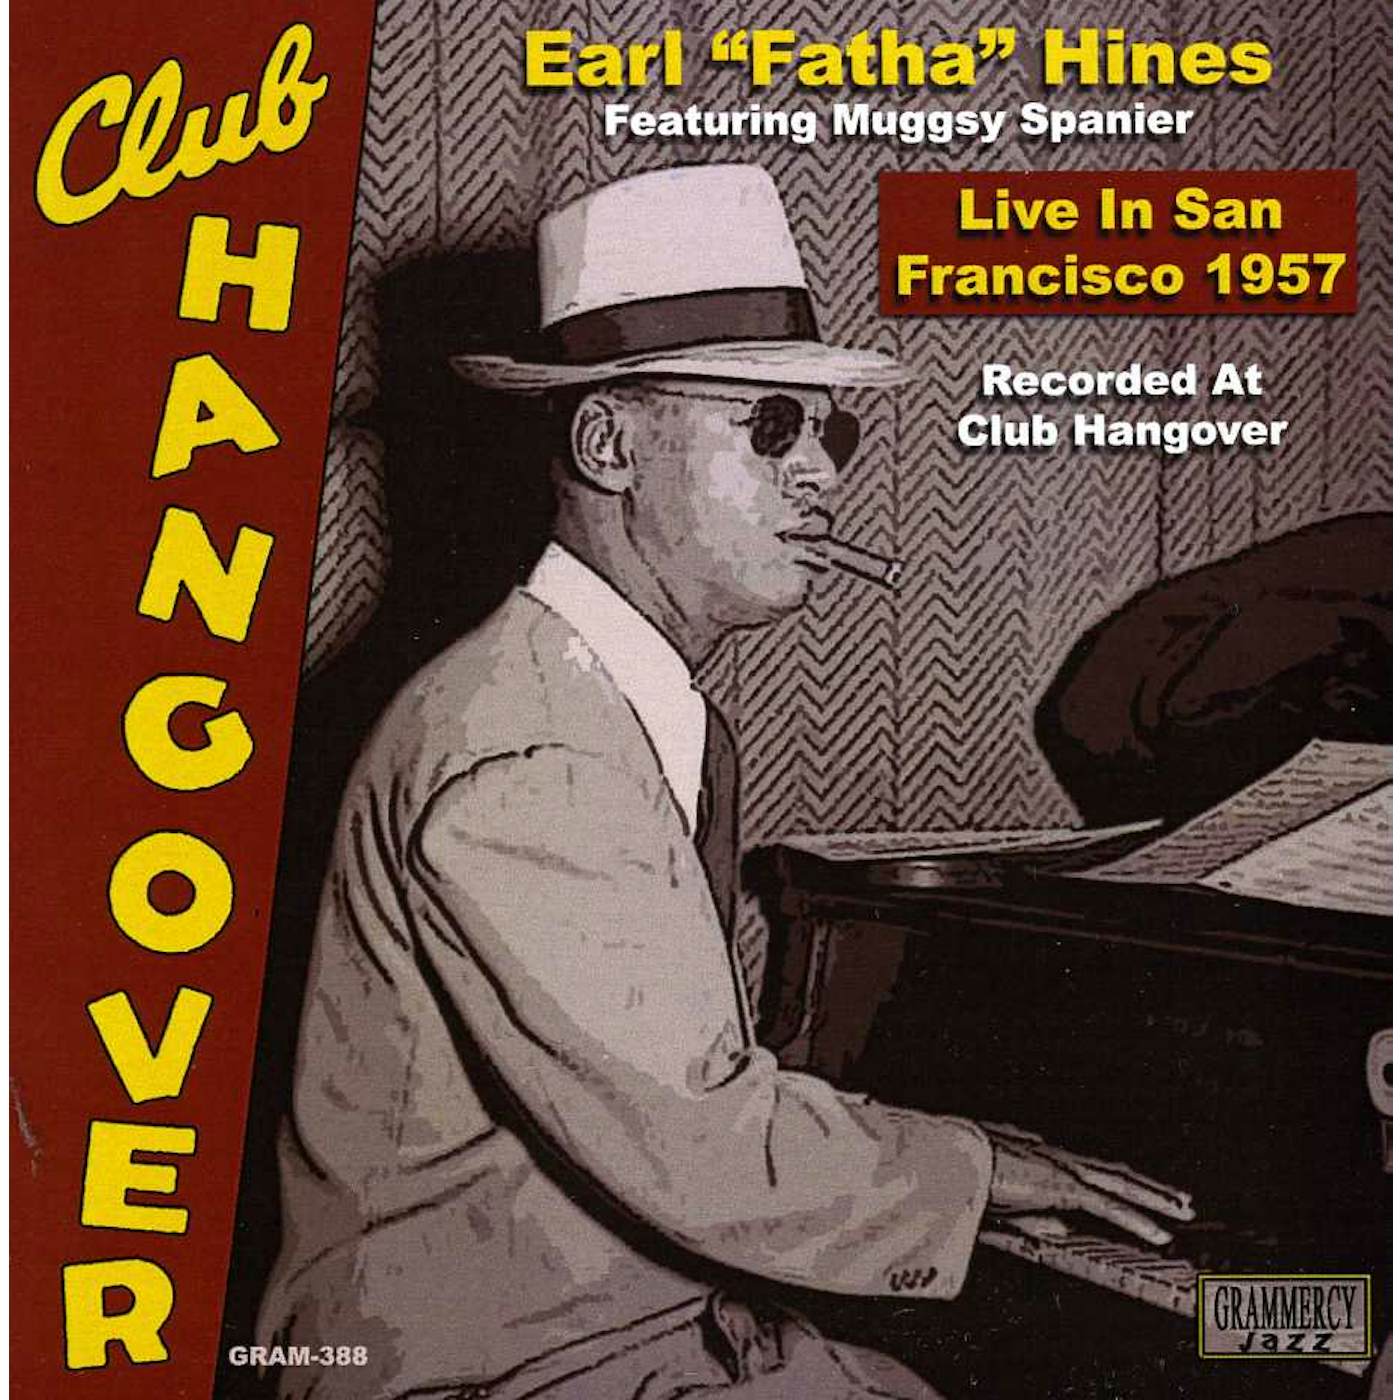 Earl Hines LIVE IN SAN FRANCISCO 1957 CD